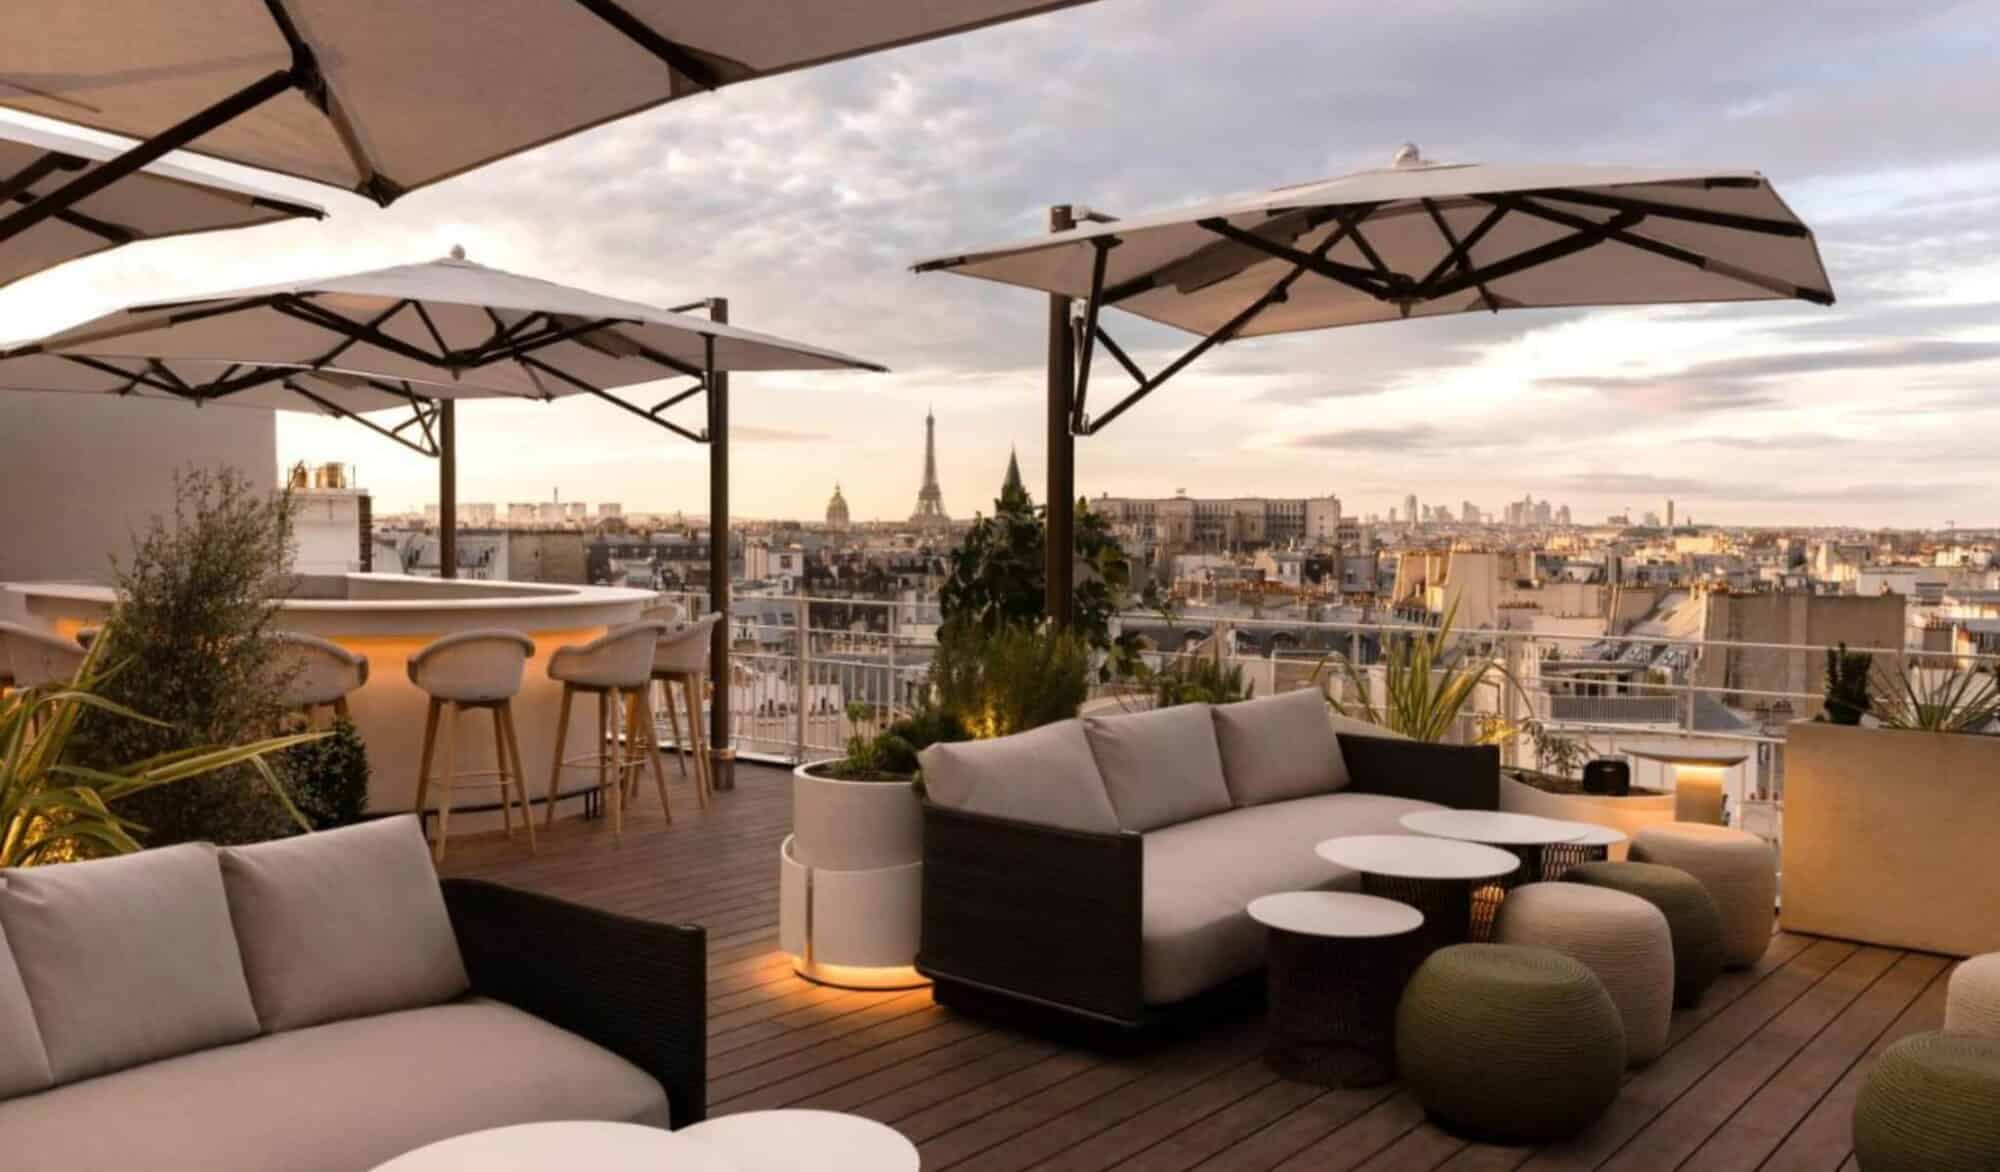 Hotel Dames des Arts's rooftop bar with off-white parasols and sofas, overlooking the Parisian skyline with the Eiffel Tower.